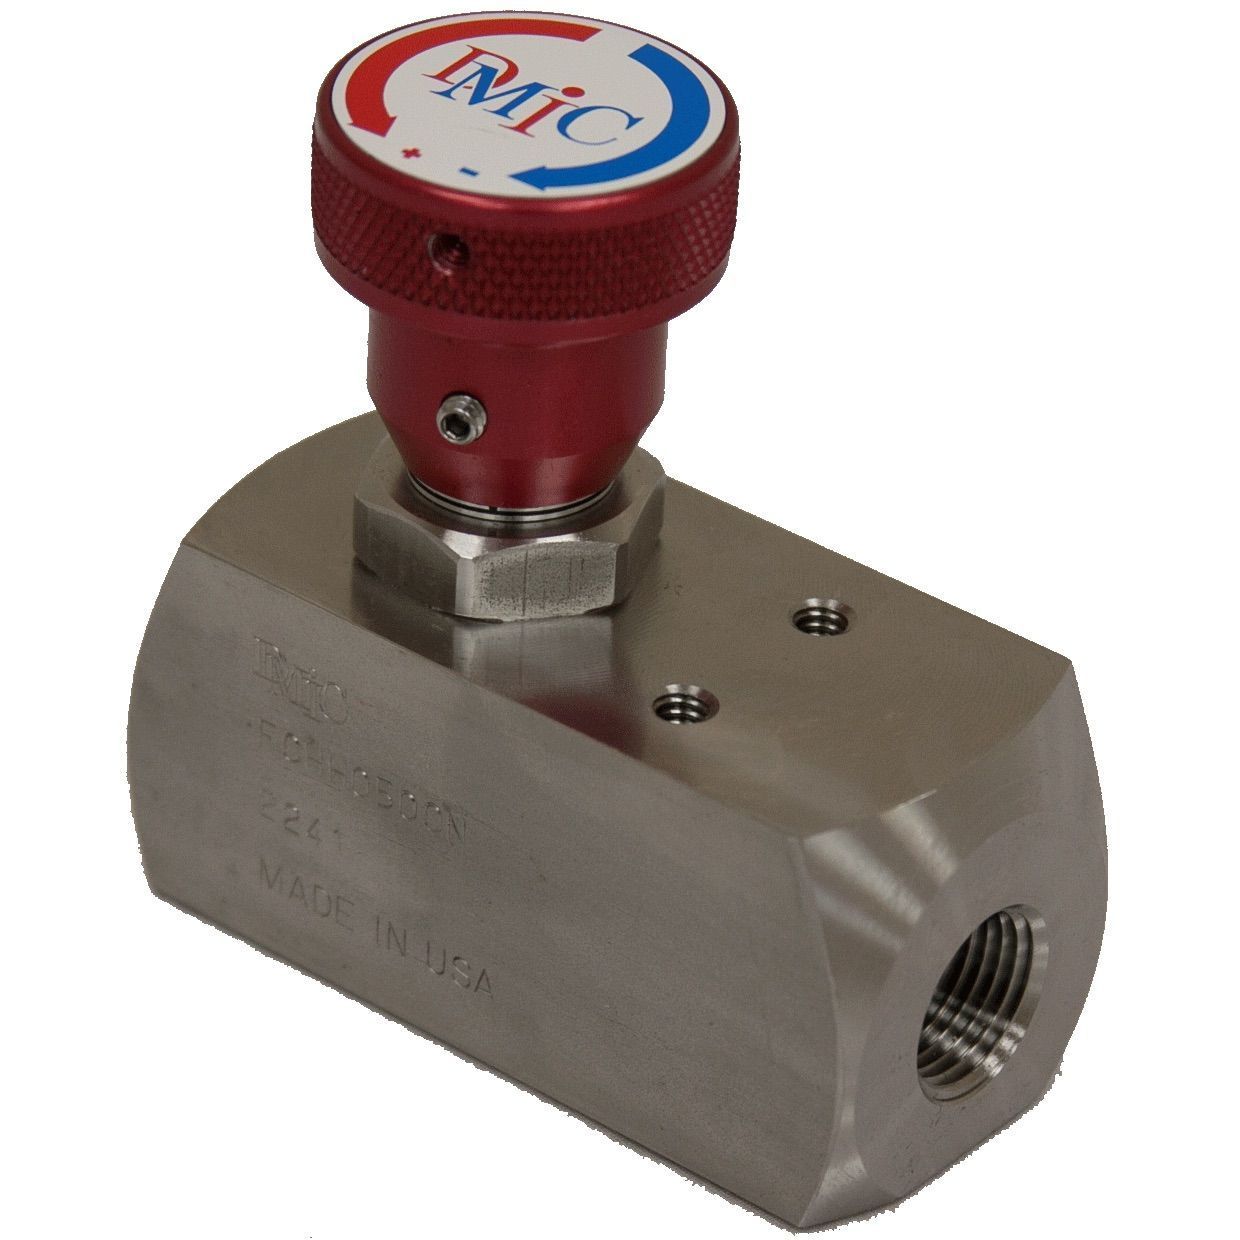 FCHH-0375N-1141 : DMIC Flow Control, Unidirectional, with Integrated Check, 3/8" NPT, Carbon Steel, 10000psi